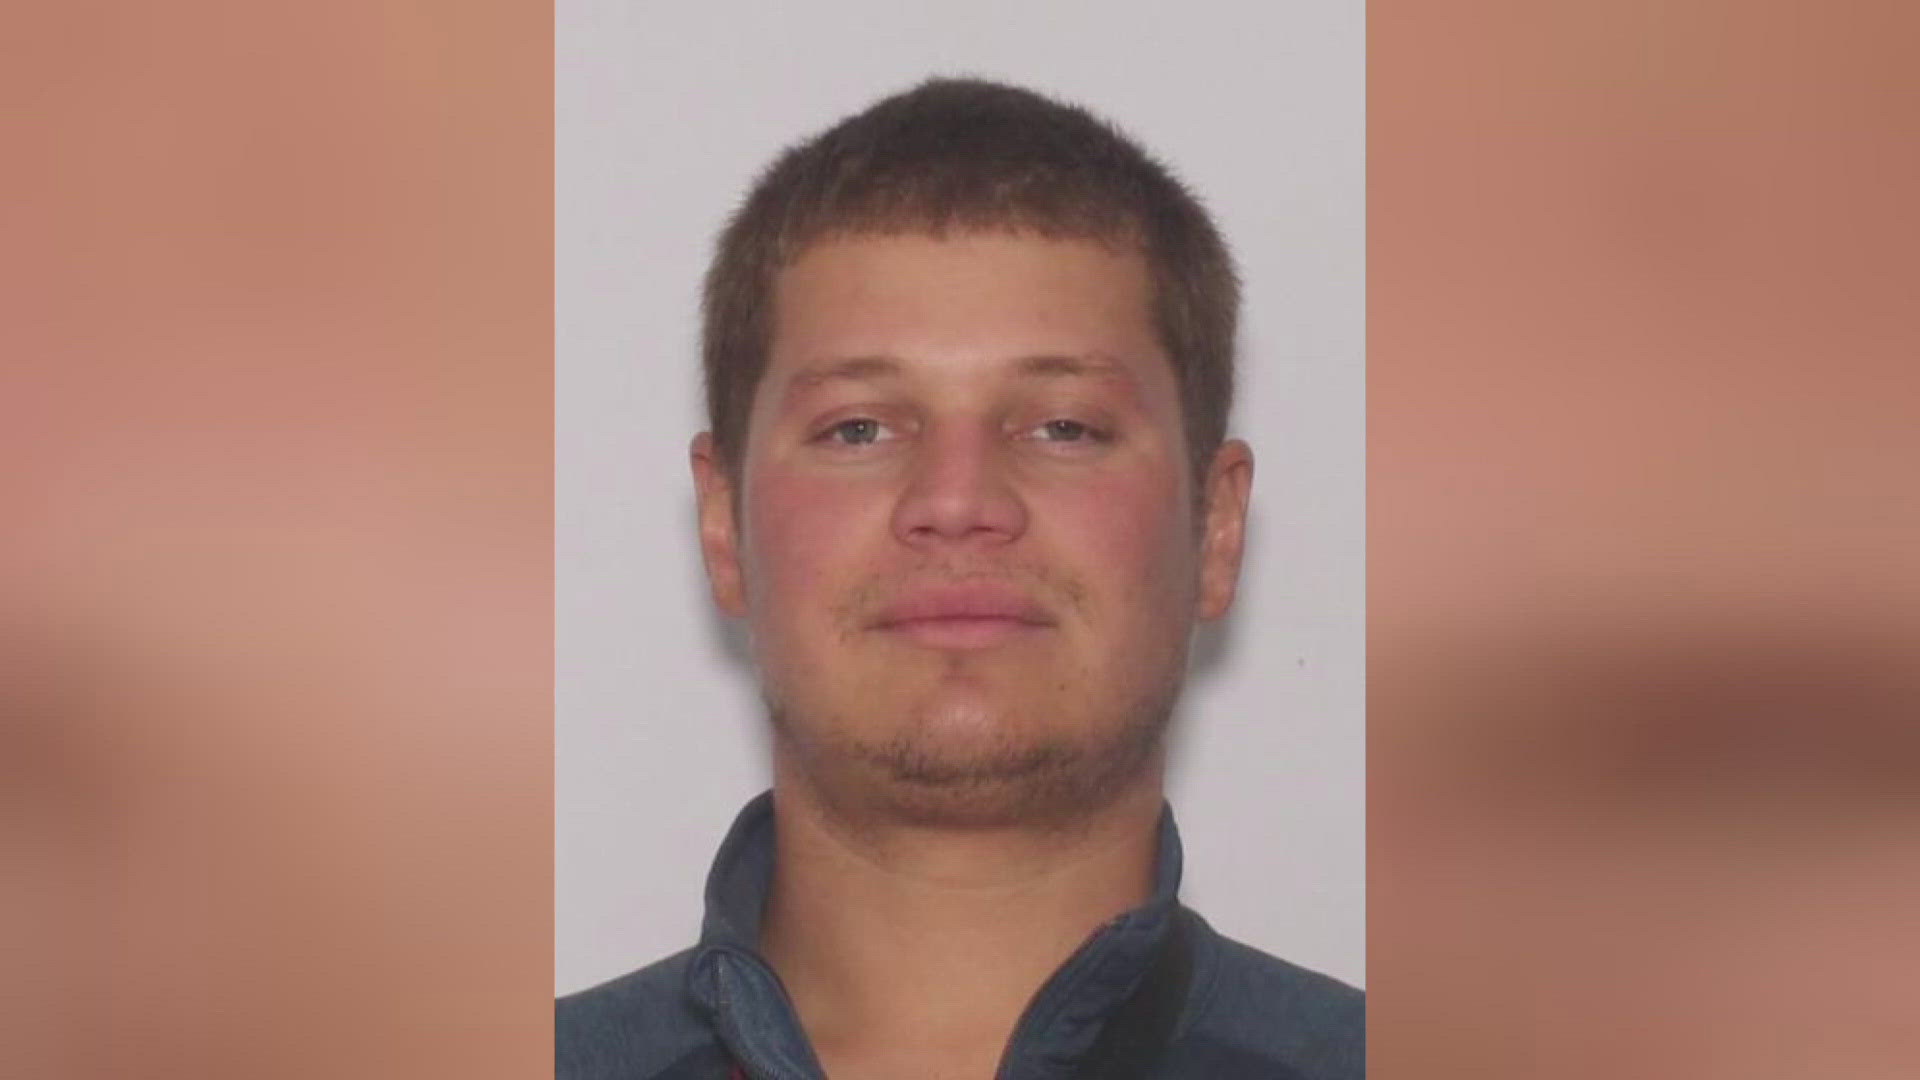 Police have identified the suspect as Ian Rich after he was arrested in Bratenahl.